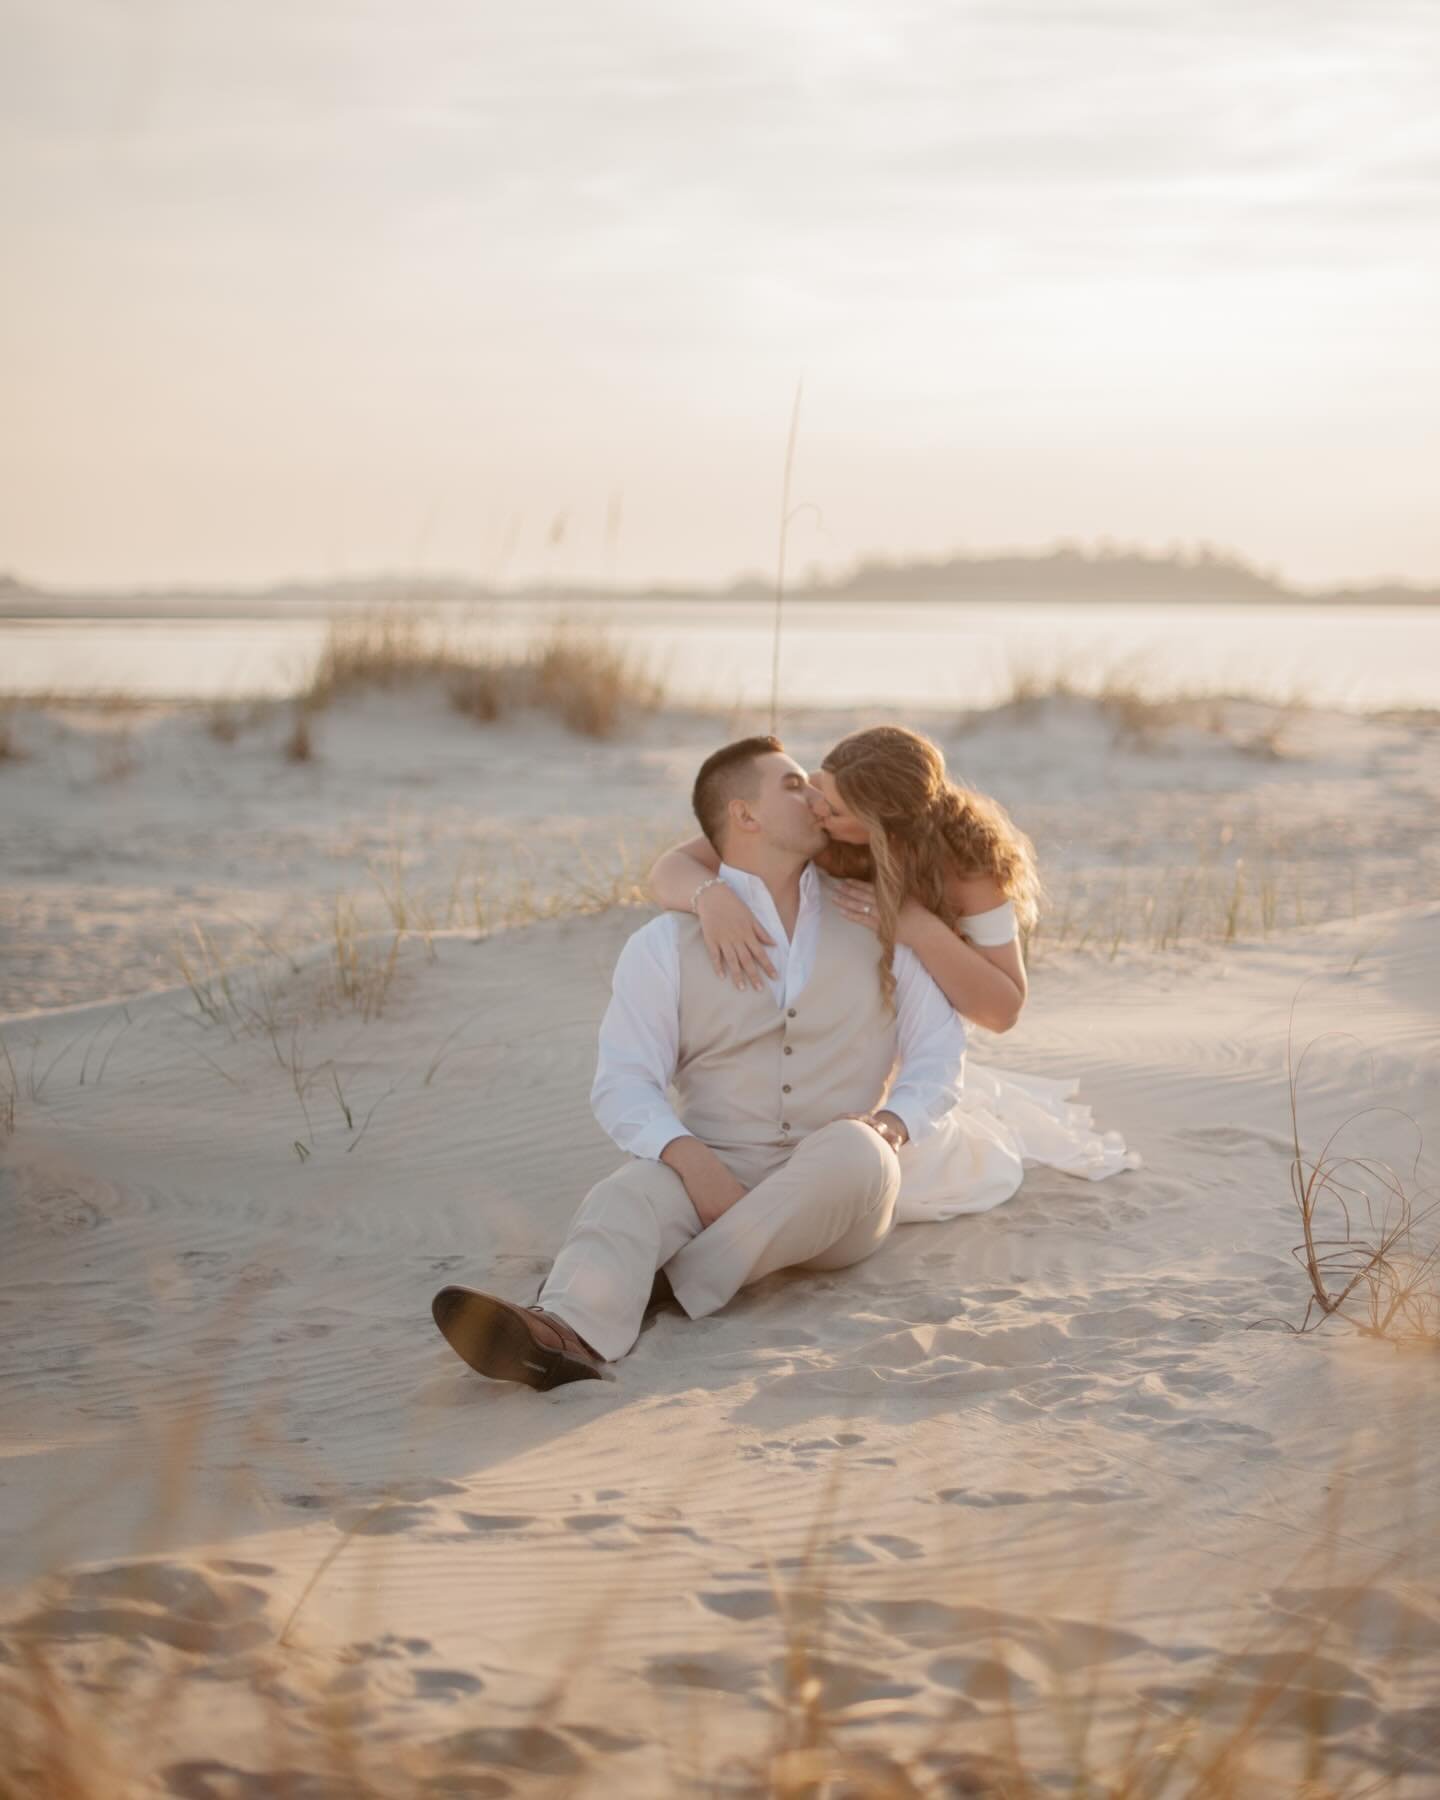 Gallery delivery day for Patricia + Cody 🤍 An elopement that&rsquo;ll stick with me because of how golden of a sunset we had, their natural chemistry, &amp; the beach completely to ourselves. So stunning!